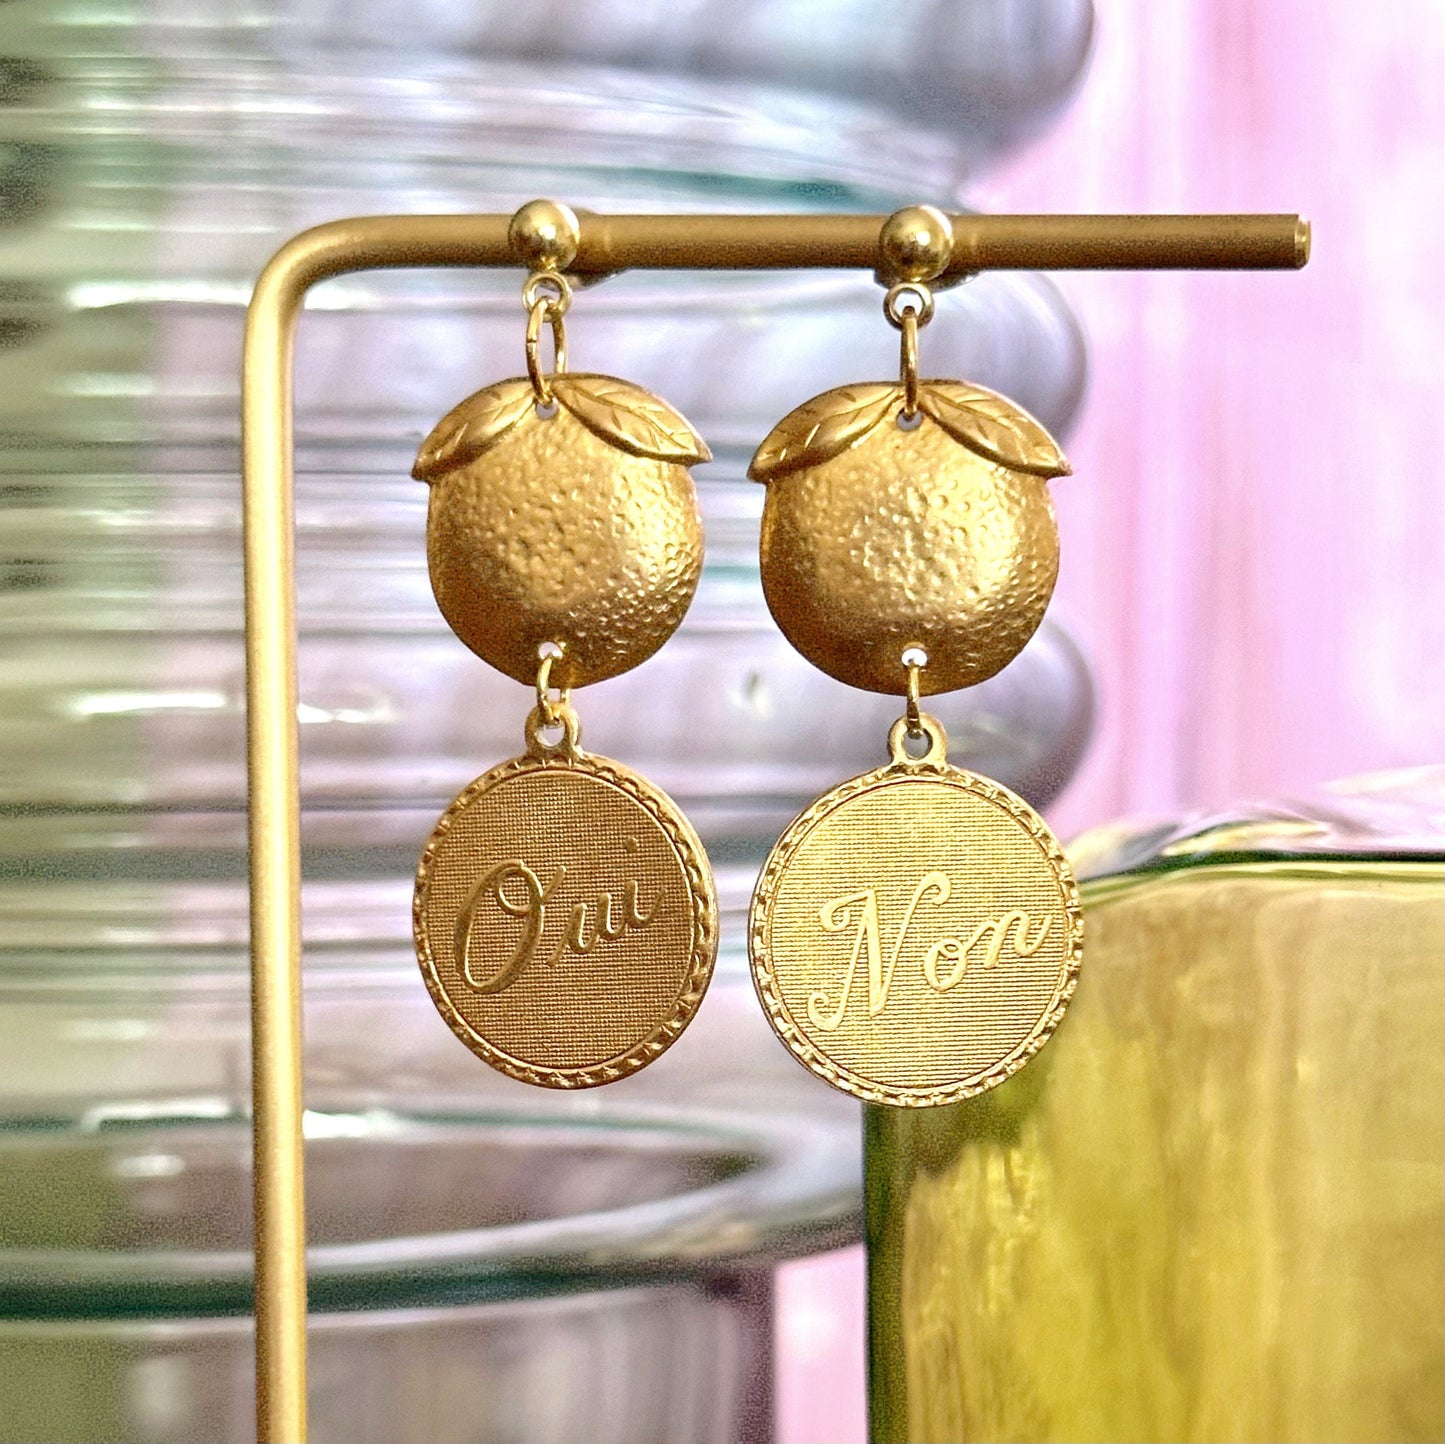 French Indecision Earrings | Vintage Brass Earrings | Fruit Jewelry | Avant Garde Style Gifts